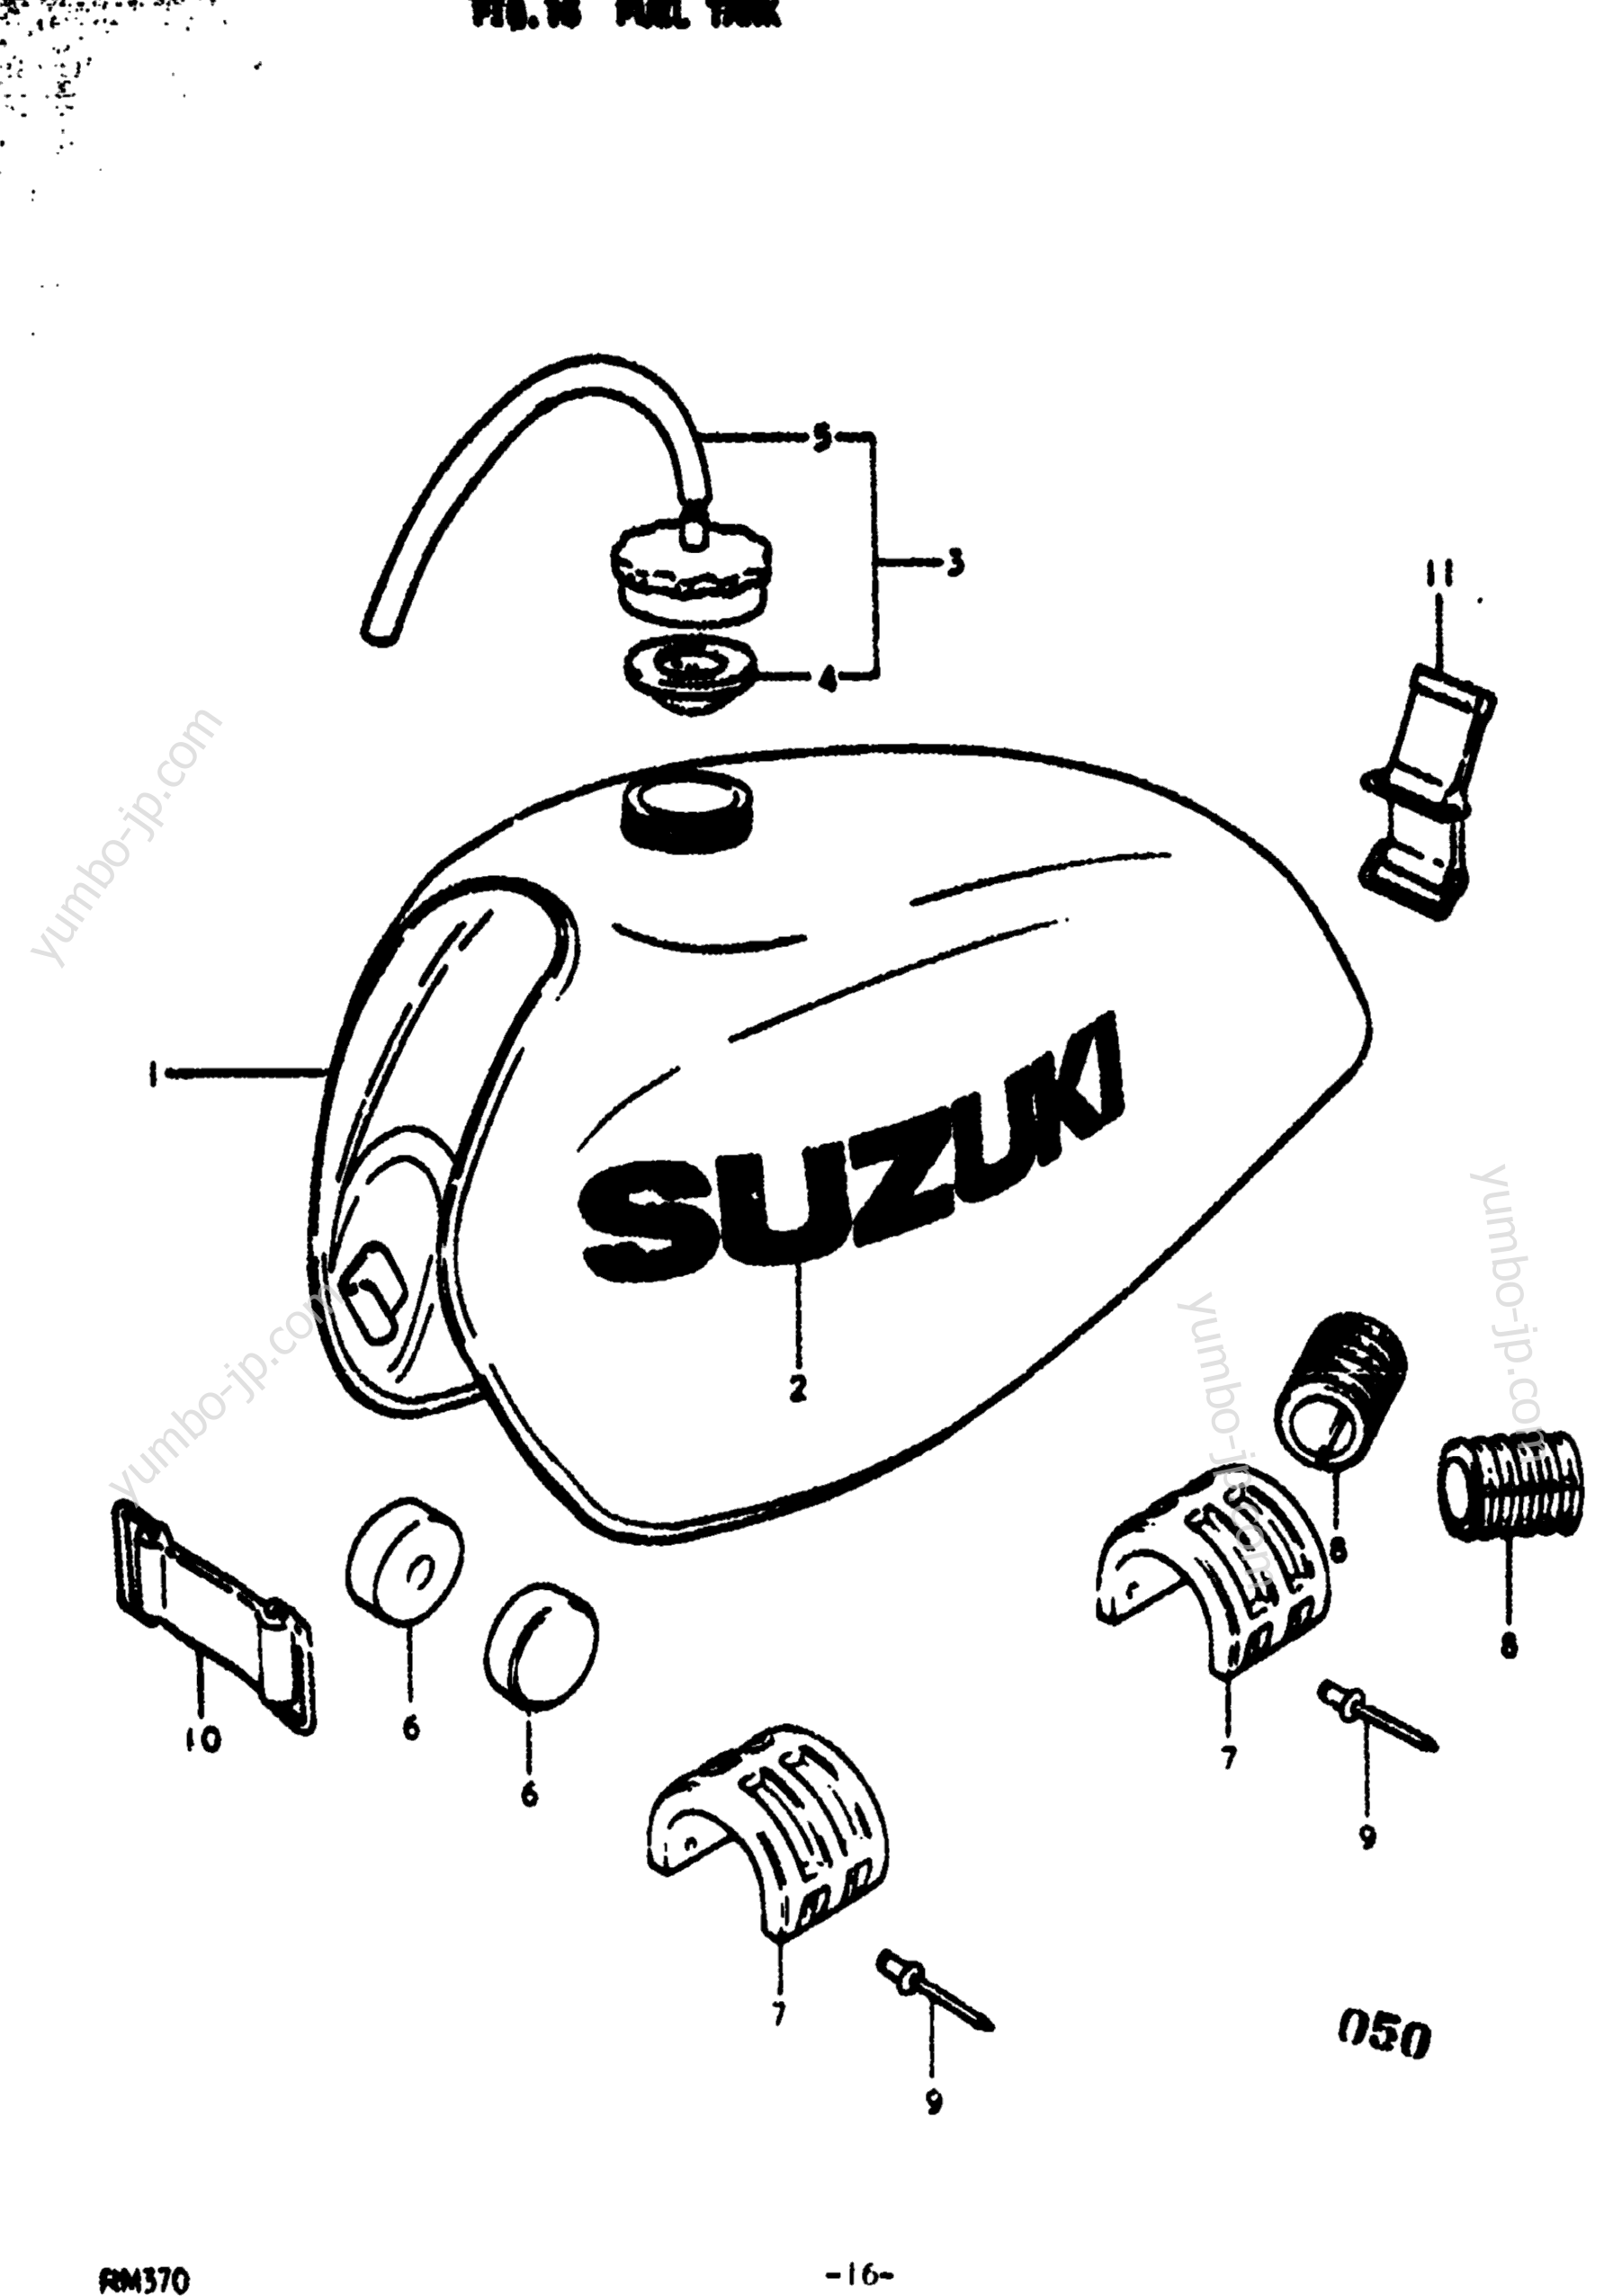 FUEL TANK for motorcycles SUZUKI RM370 1976 year